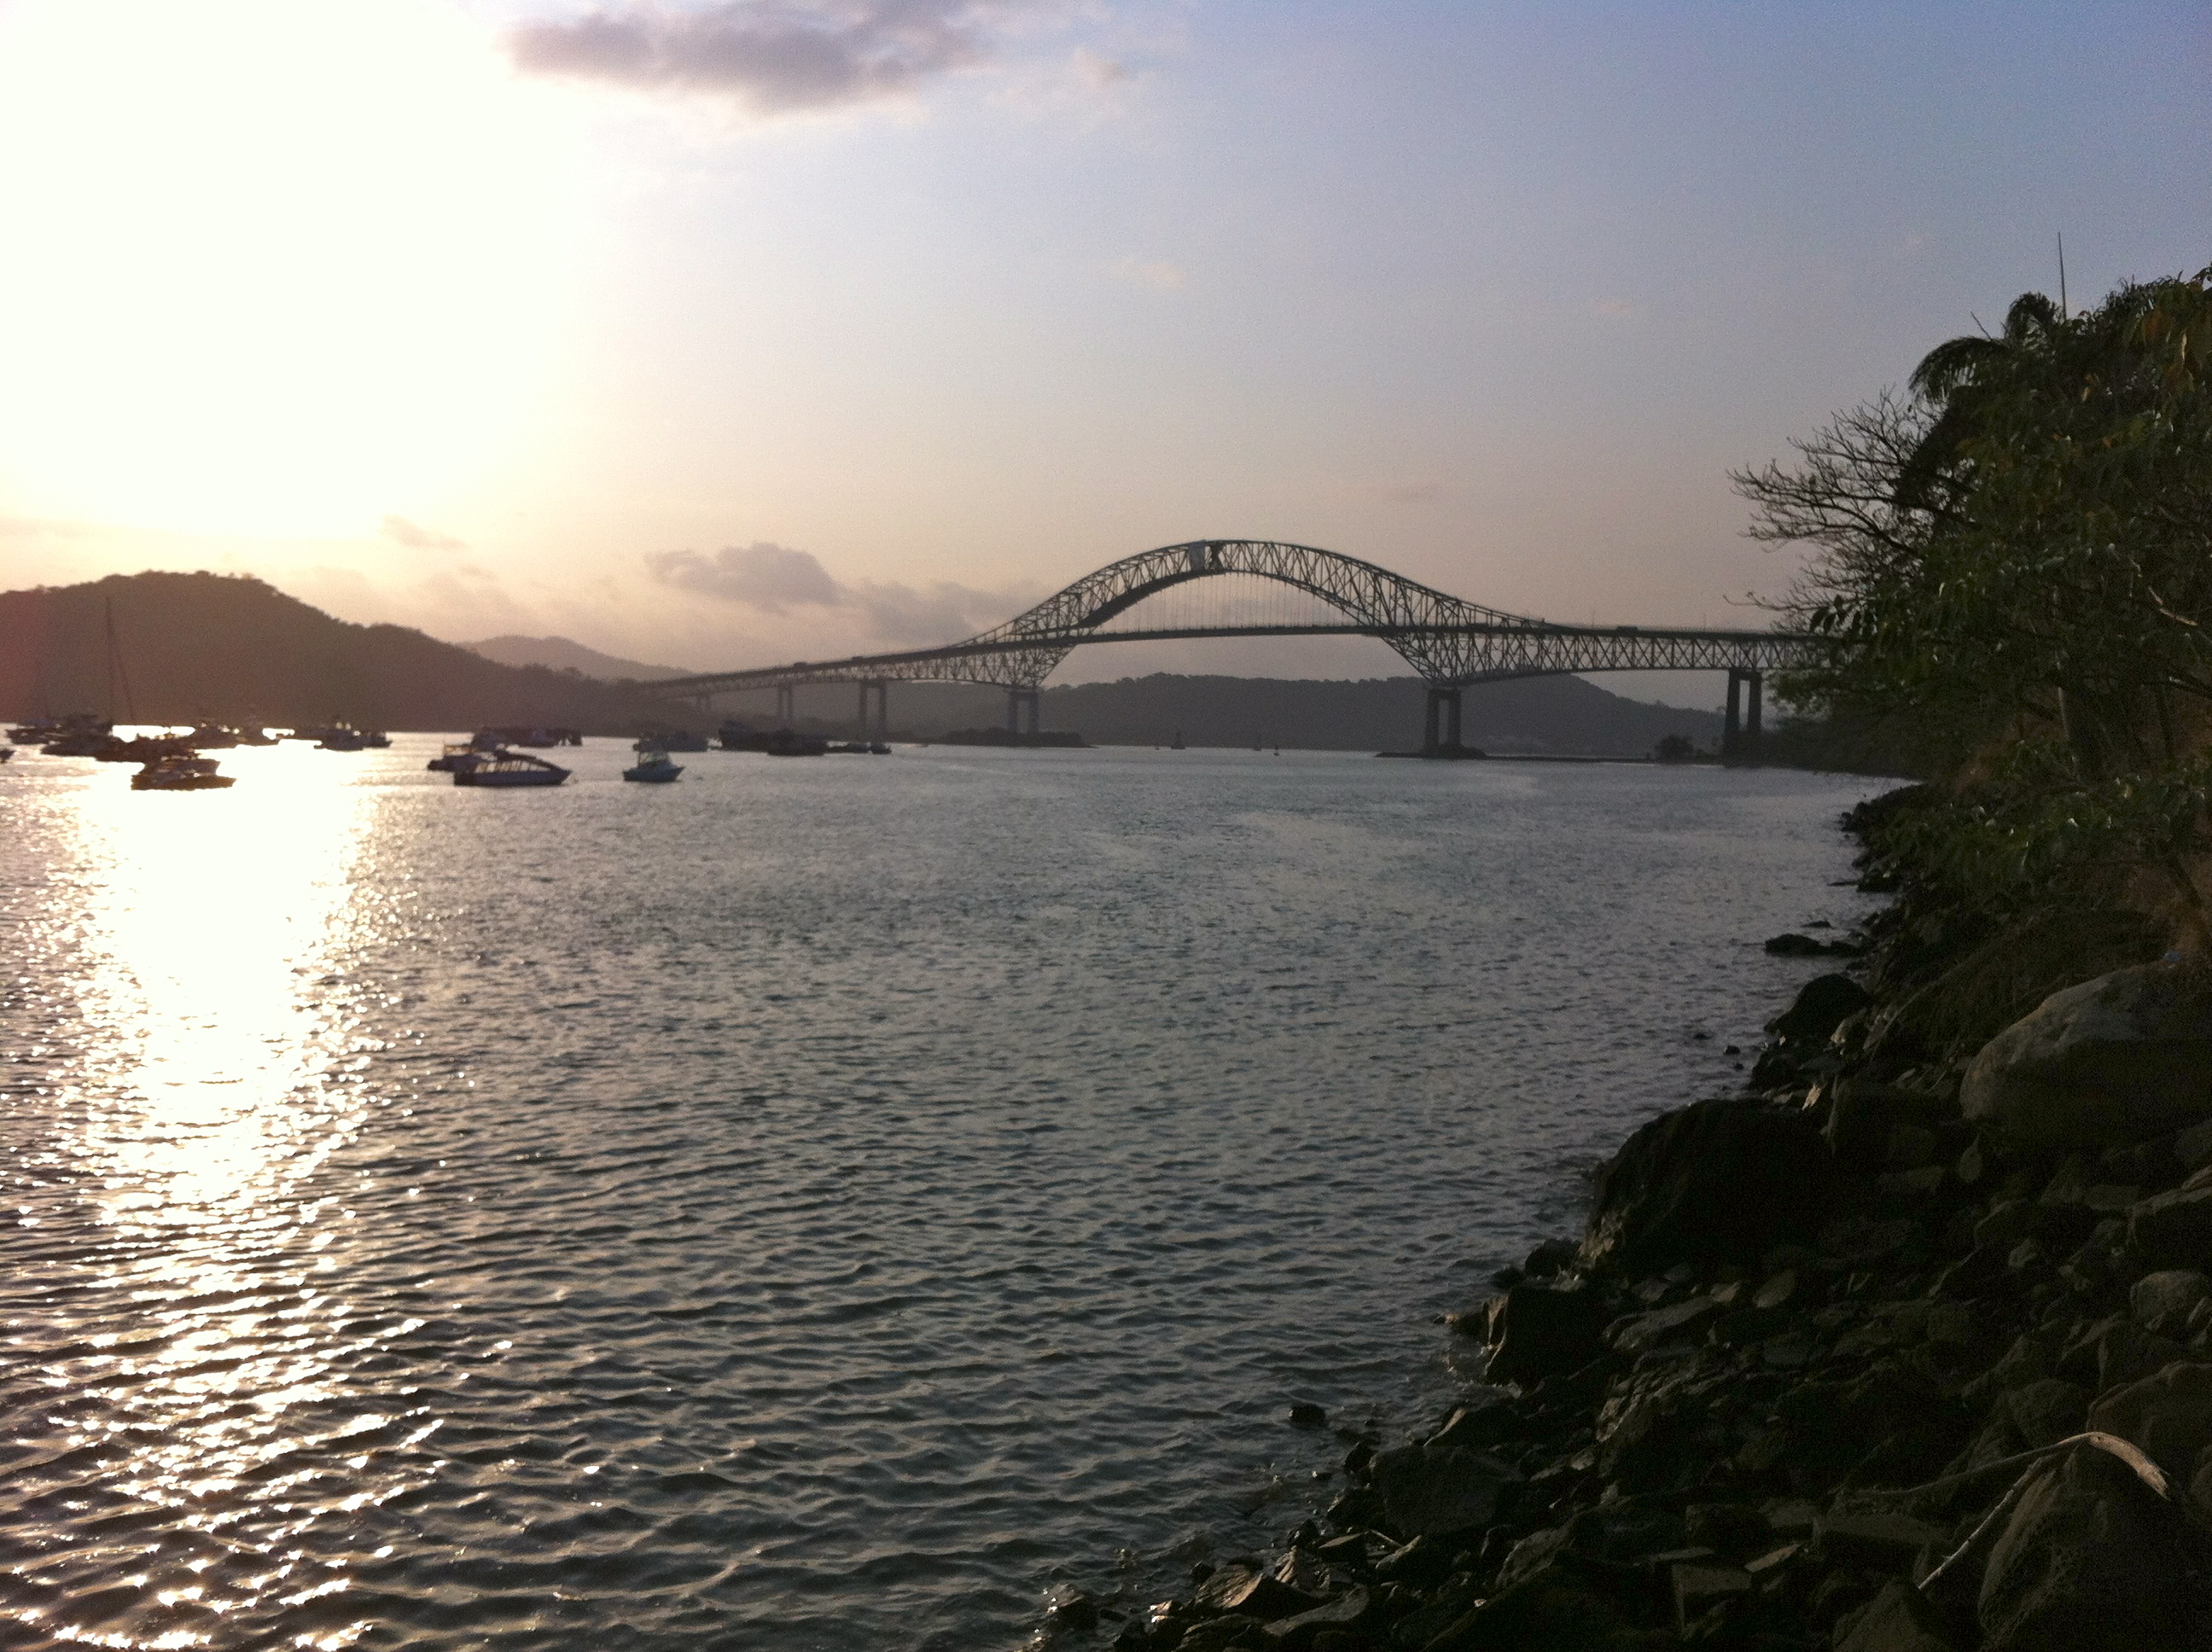 The Bridge of the America's spanning the Pacific entrance to the Panama Canal.